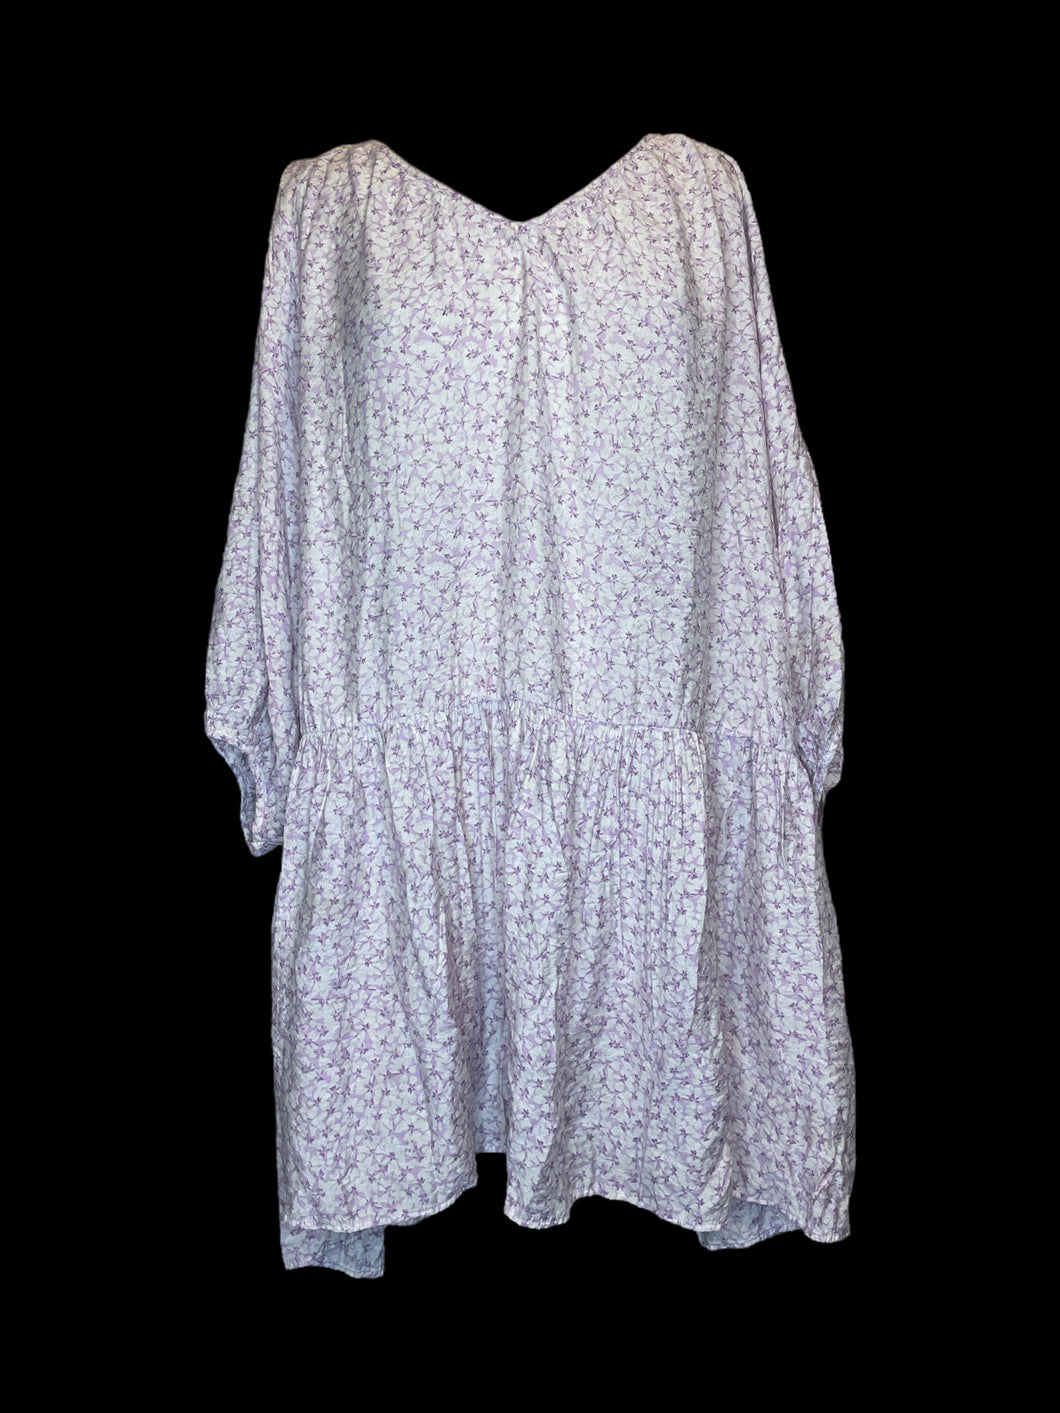 4X Lilac & white floral pattern 1/2 sleeve top